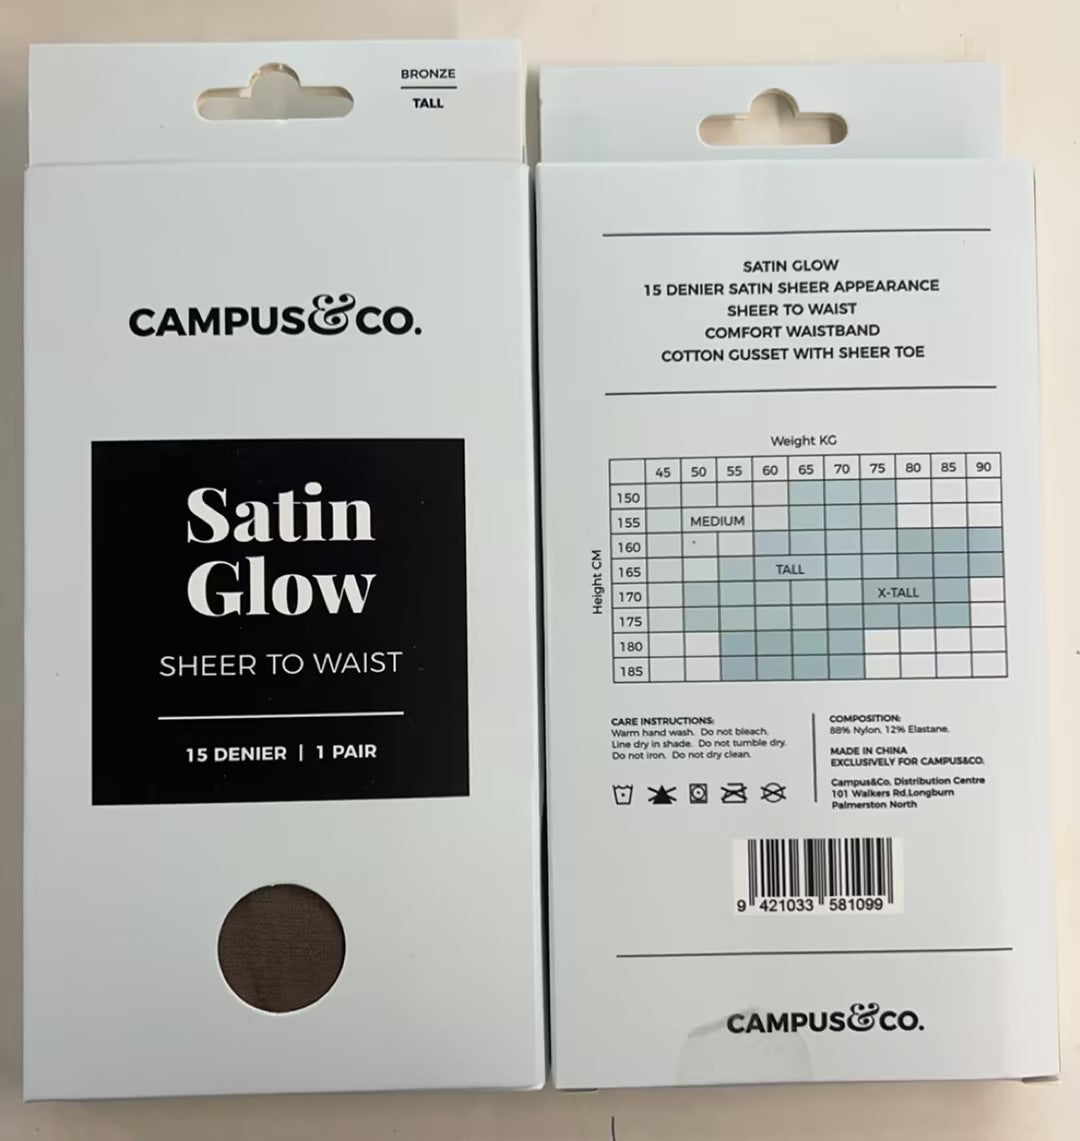 Campus&Co. Satin Glow Bronze Sheer to Waist Tall (Case of 10)